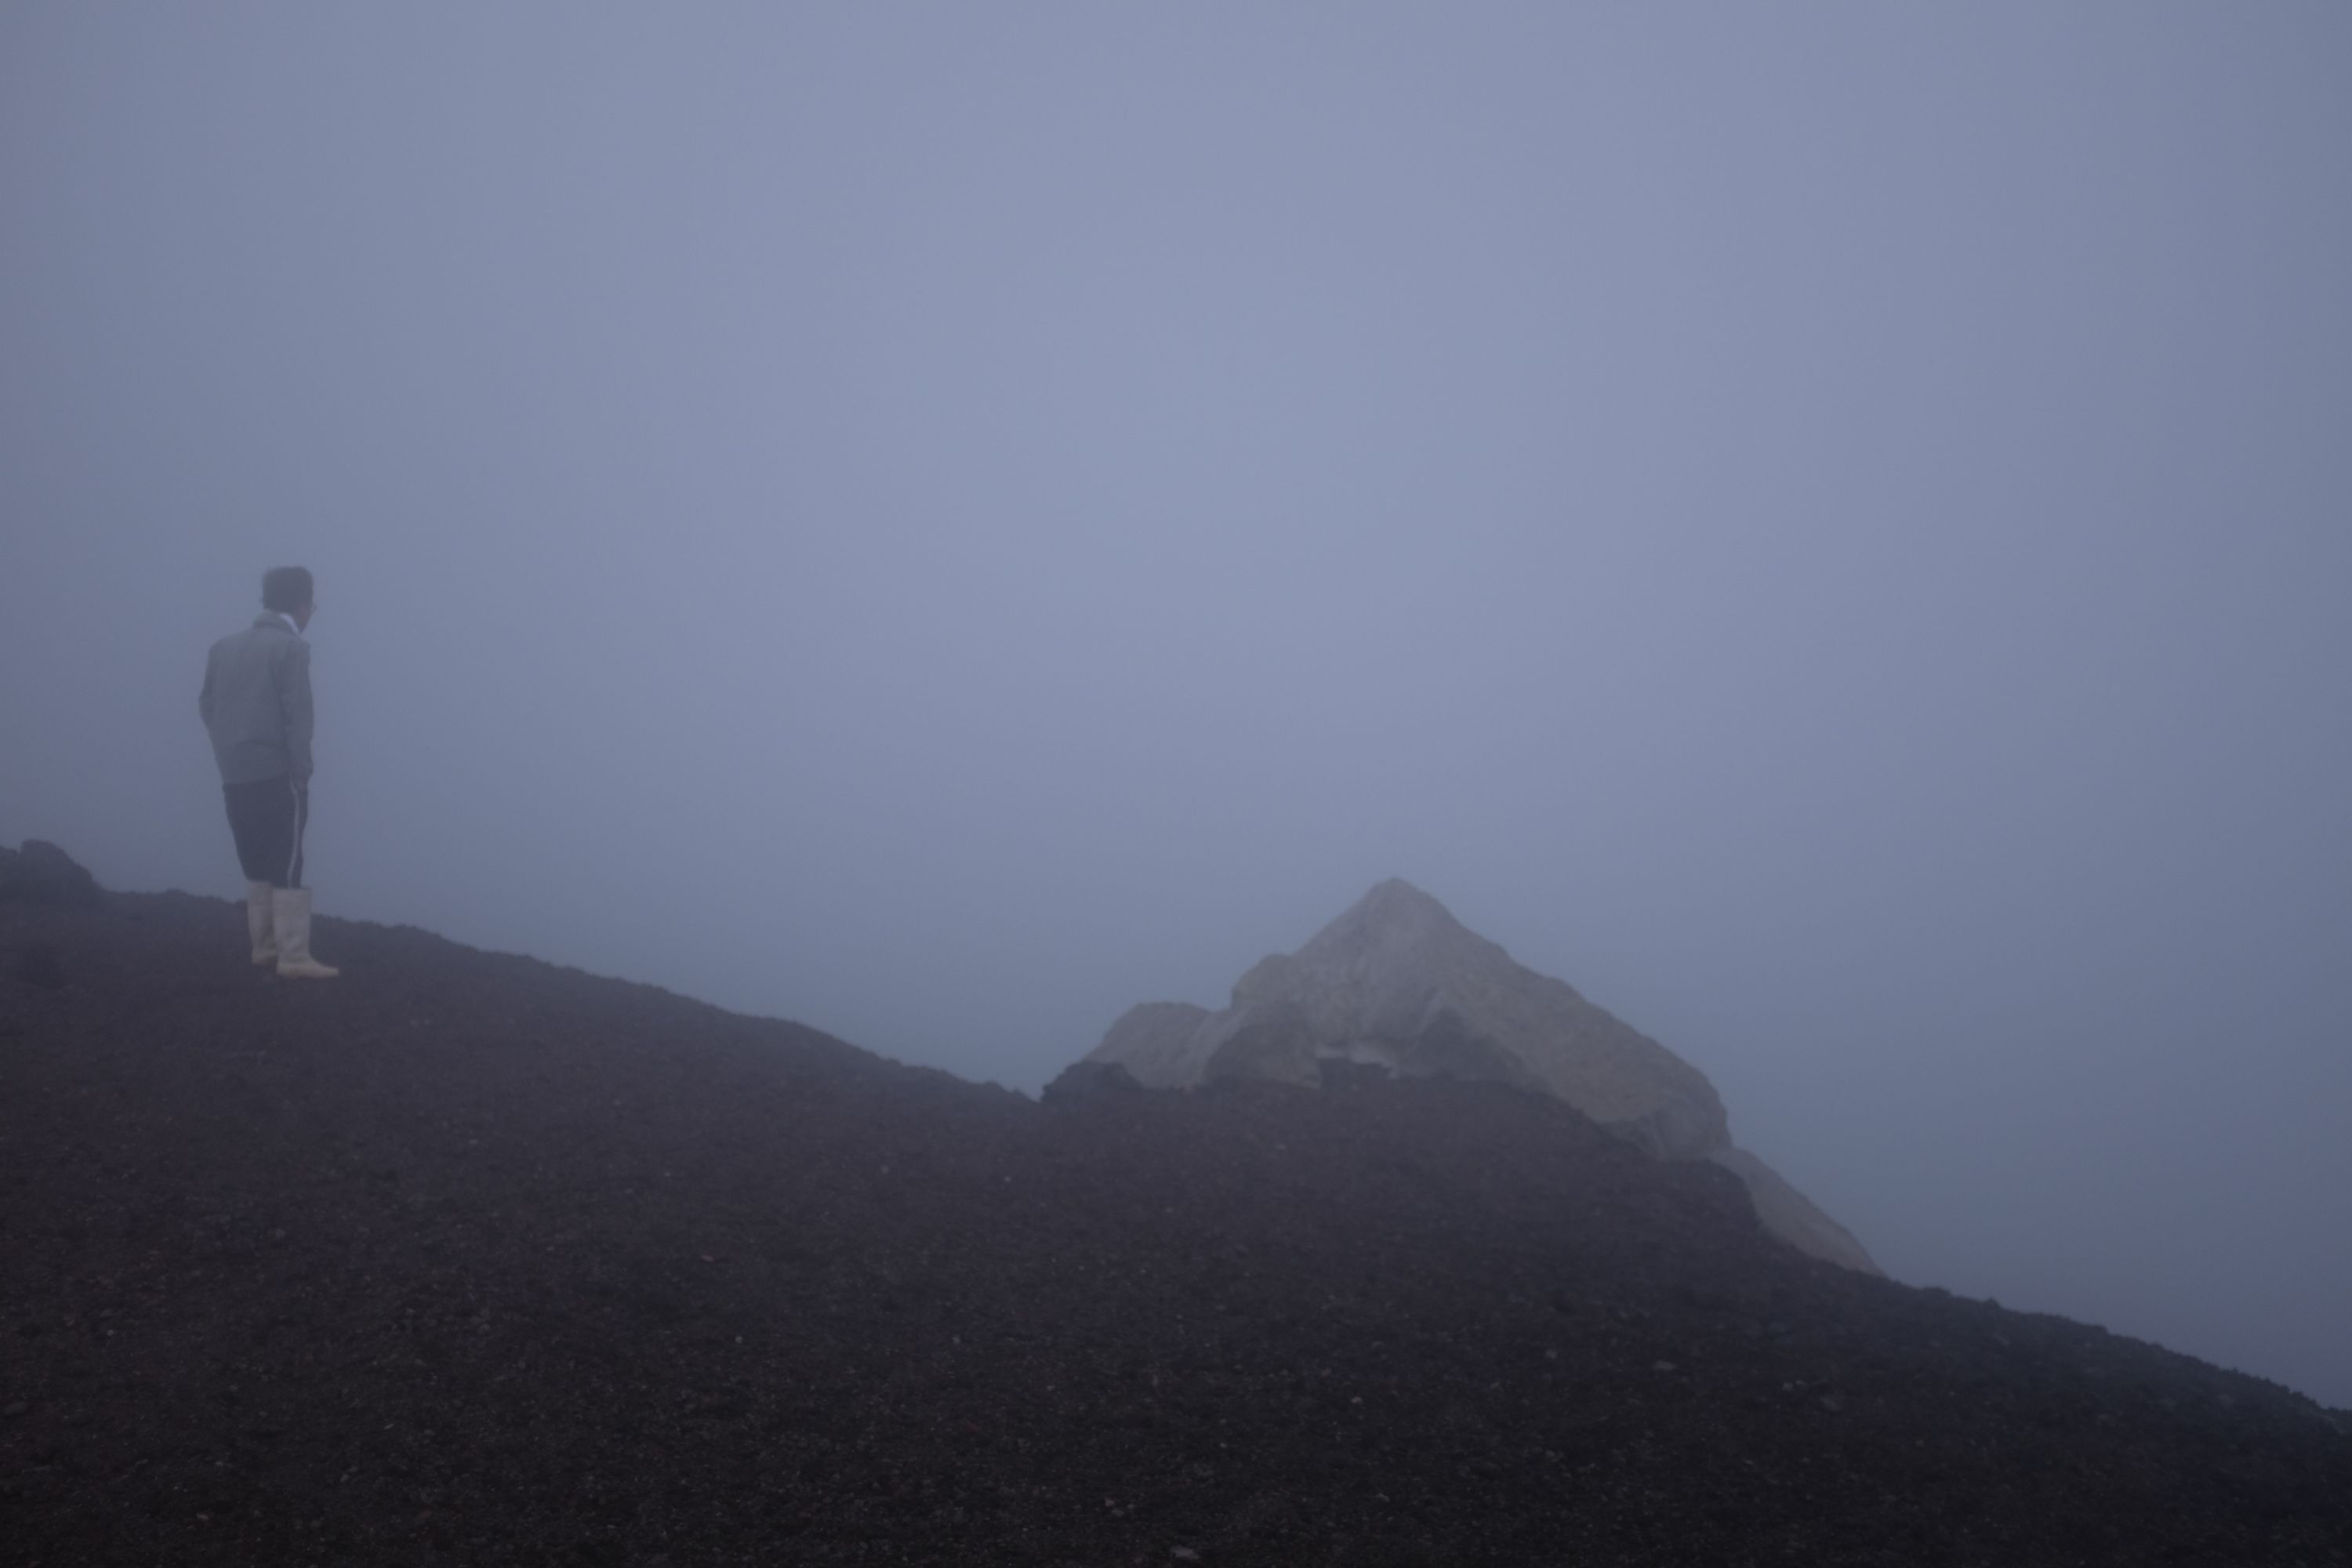 A man in white rubber boots, standing on a scree slope, looks into the fog.